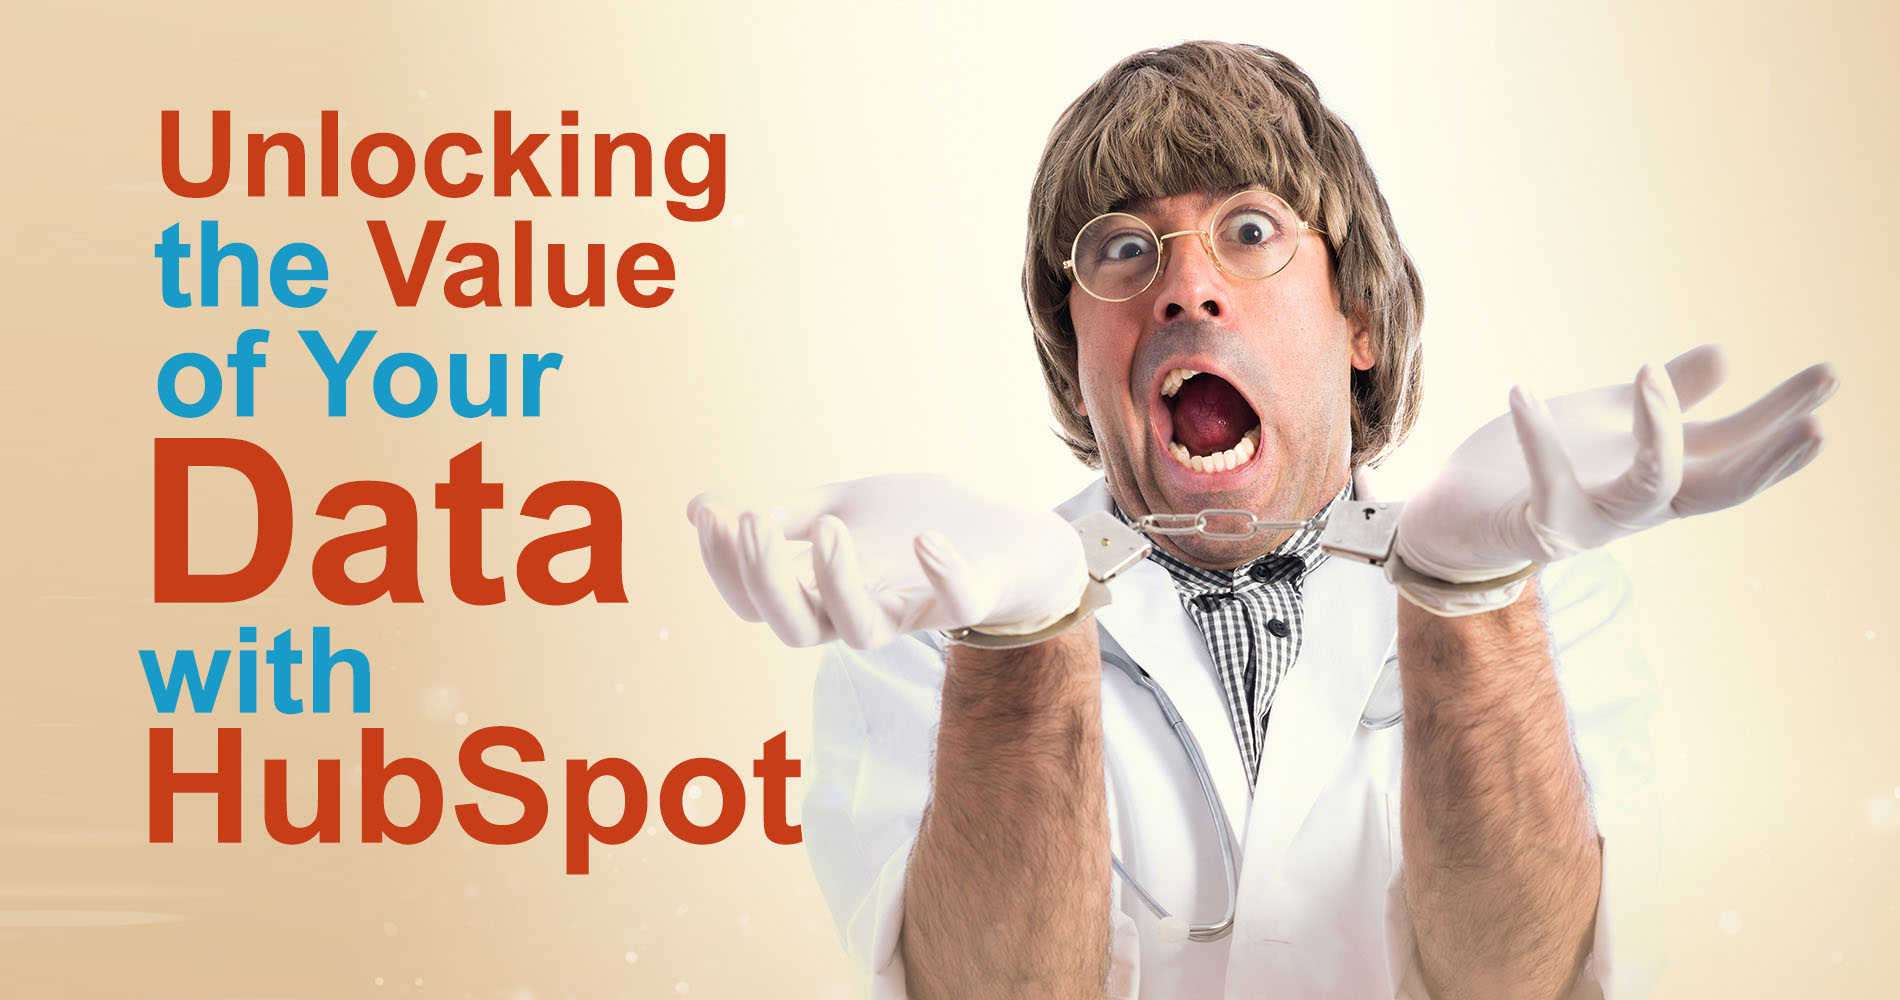 Unlocking the Value of Your Data with HubSpot